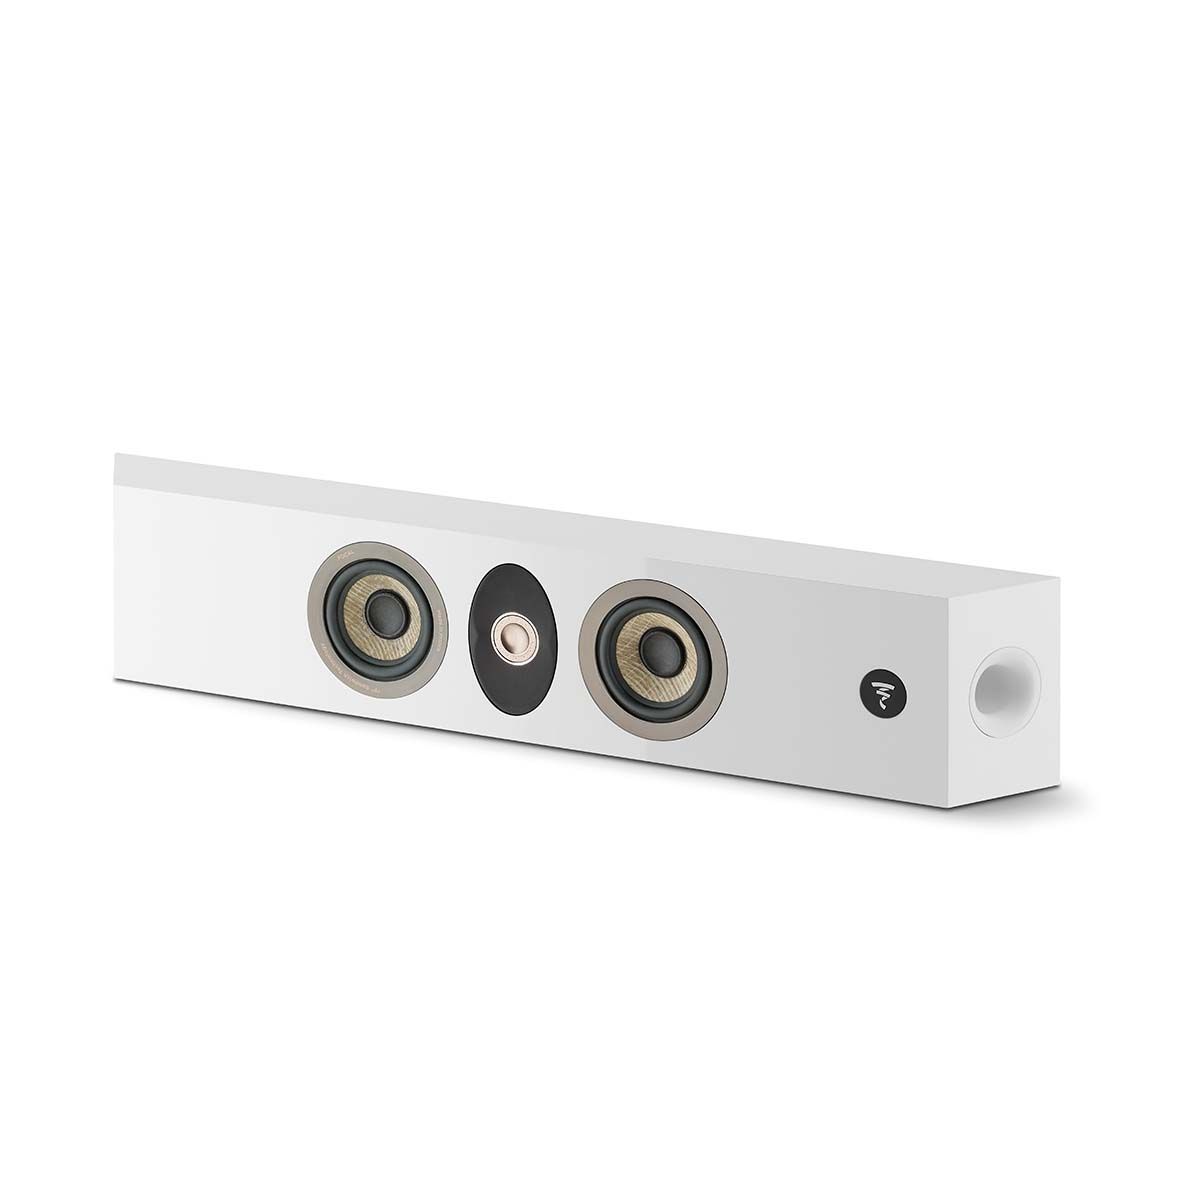 Focal On Wall 301 Speaker, Gloss White, horizontal front angle without grille